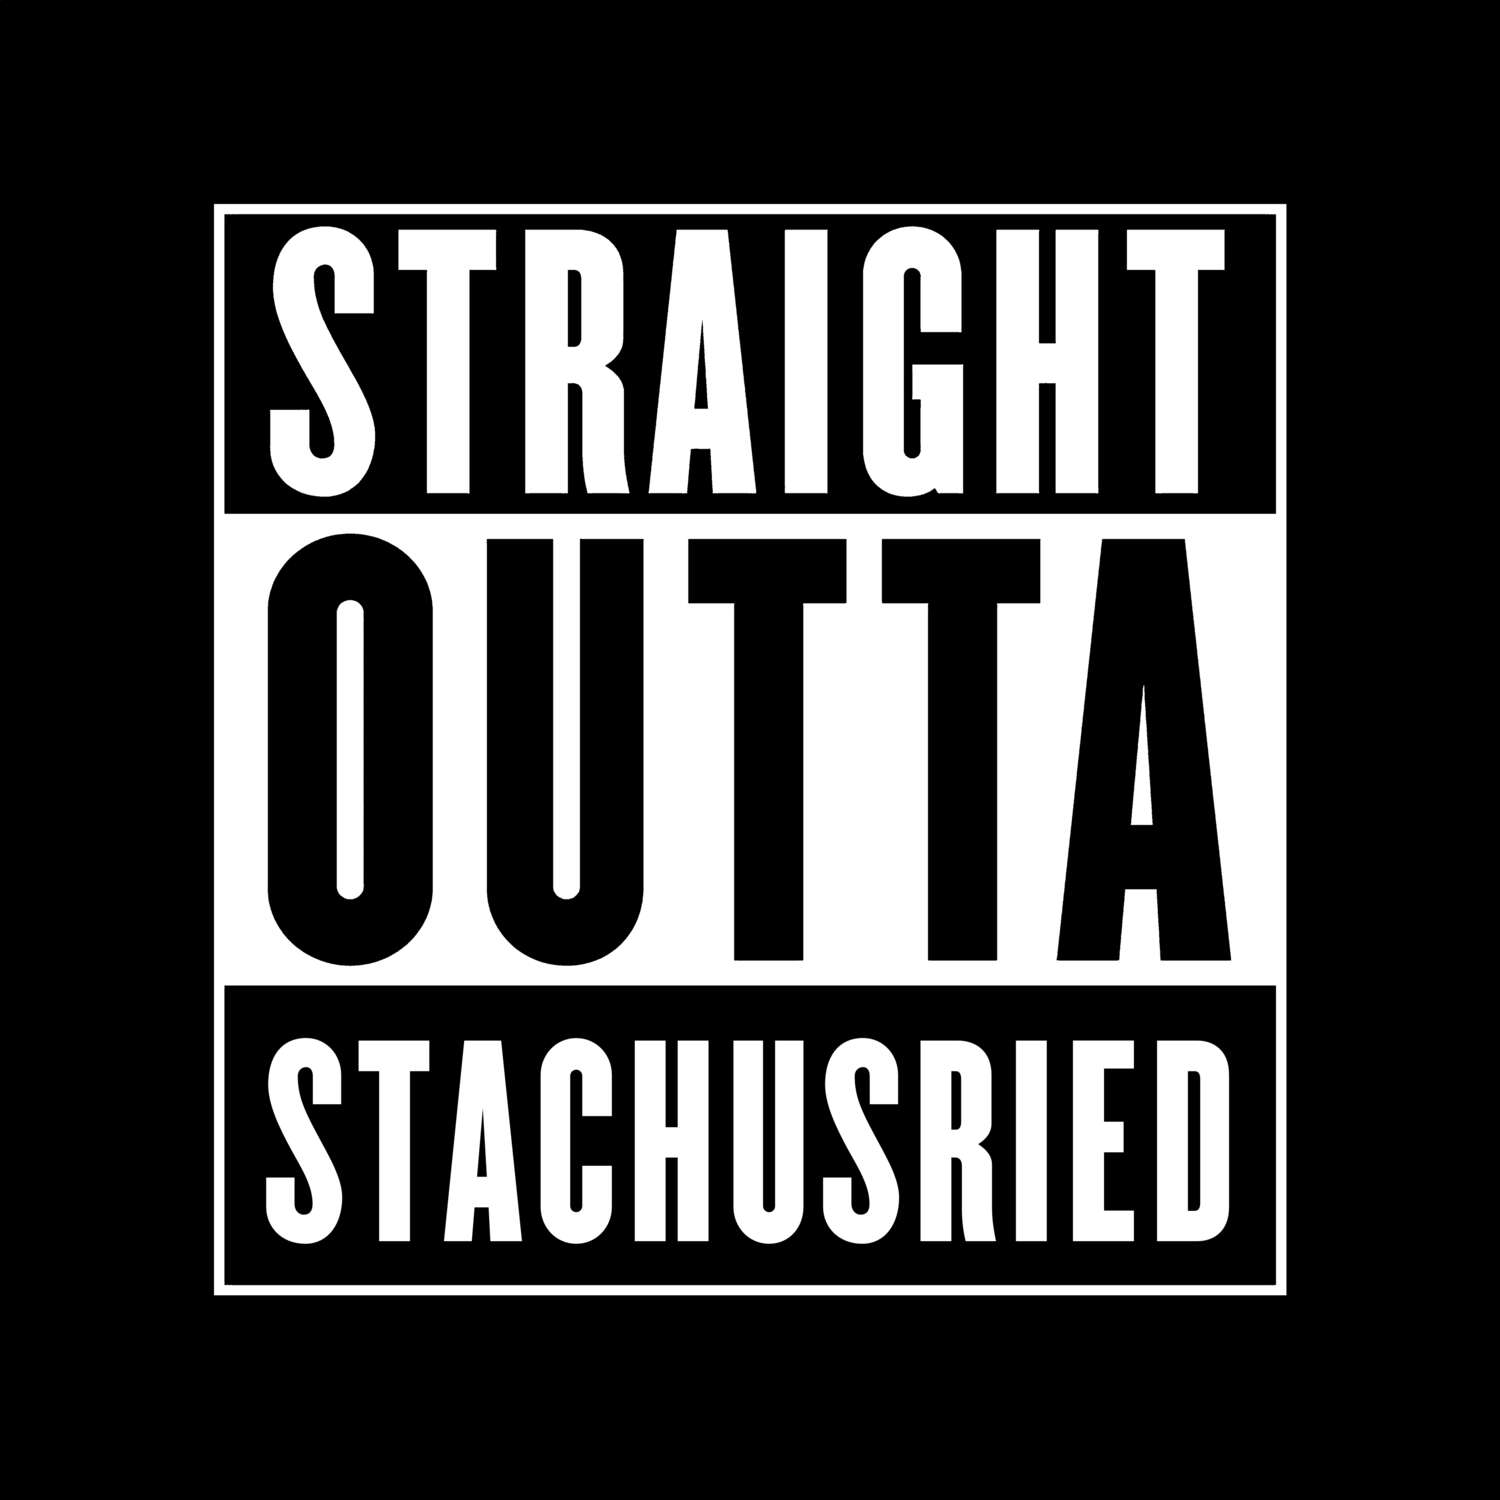 Stachusried T-Shirt »Straight Outta«